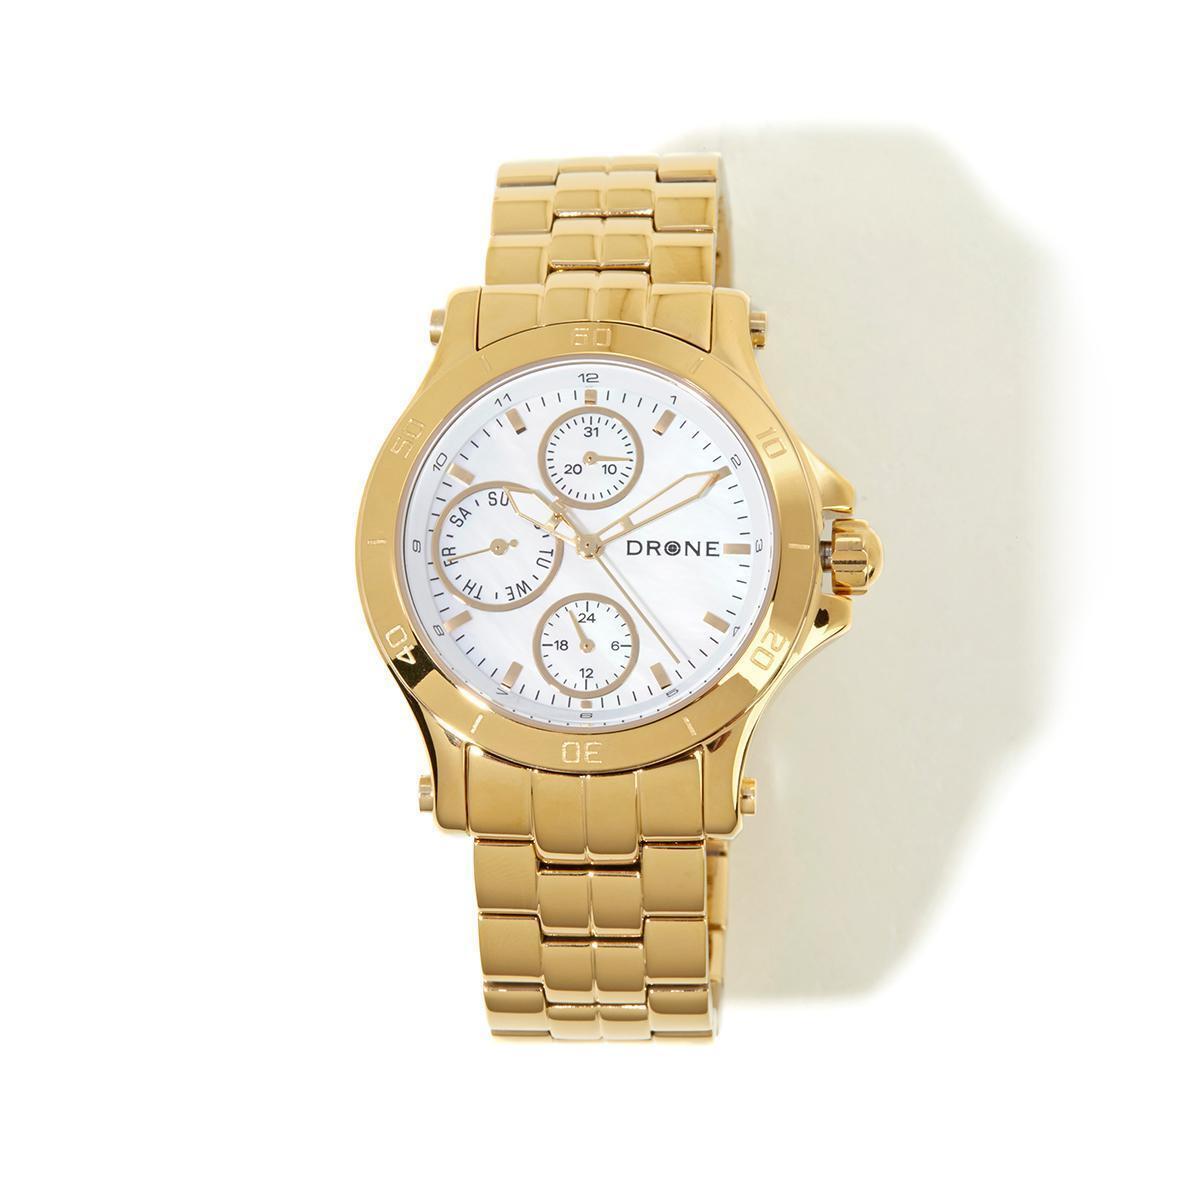 Drone Precision Timepieces Mother-Of-Pearl Dial Goldtone Bracelet Watch Hsn $219 | Wristwatches